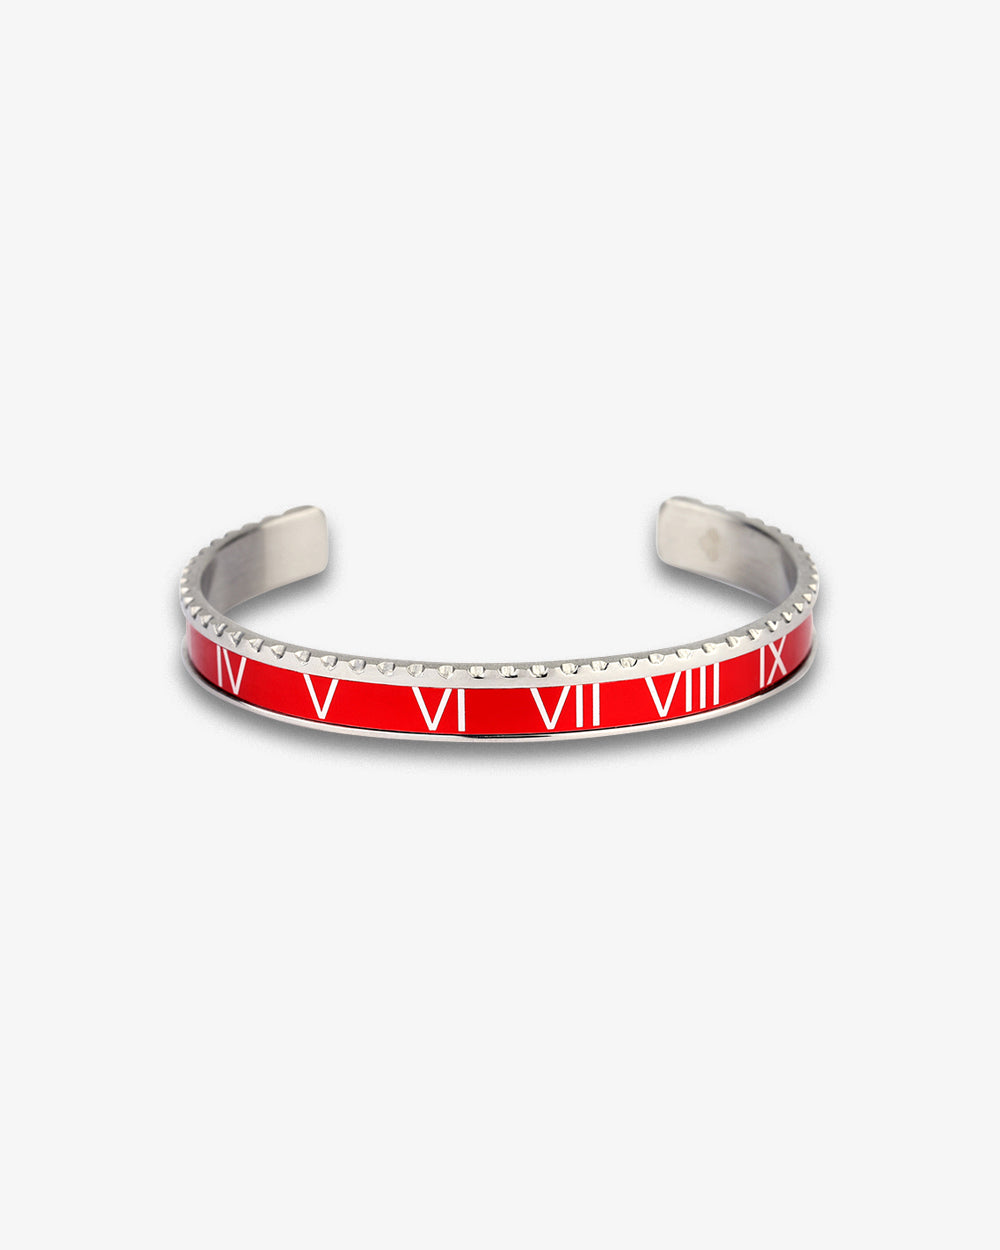 Swiss Concept Classic Roman Numeral Speed Bracelet (Red & Stainless Steel) - Stainless Steel